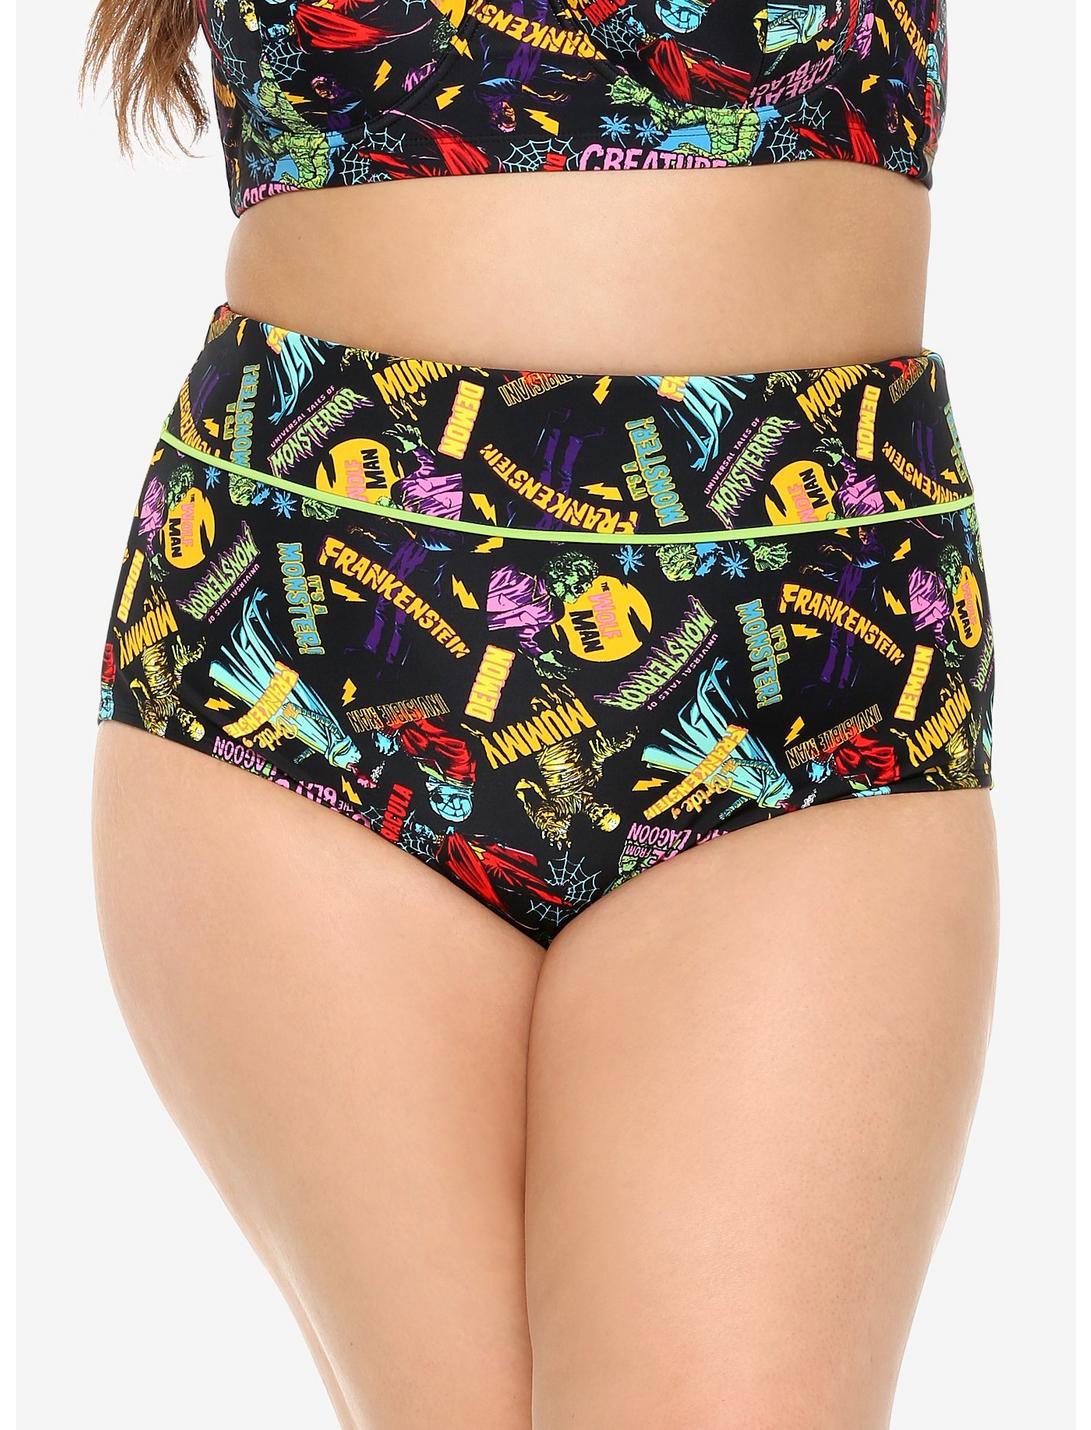 Universal Monsters High-Waisted Swim Bottoms Plus Size, MULTI, hi-res